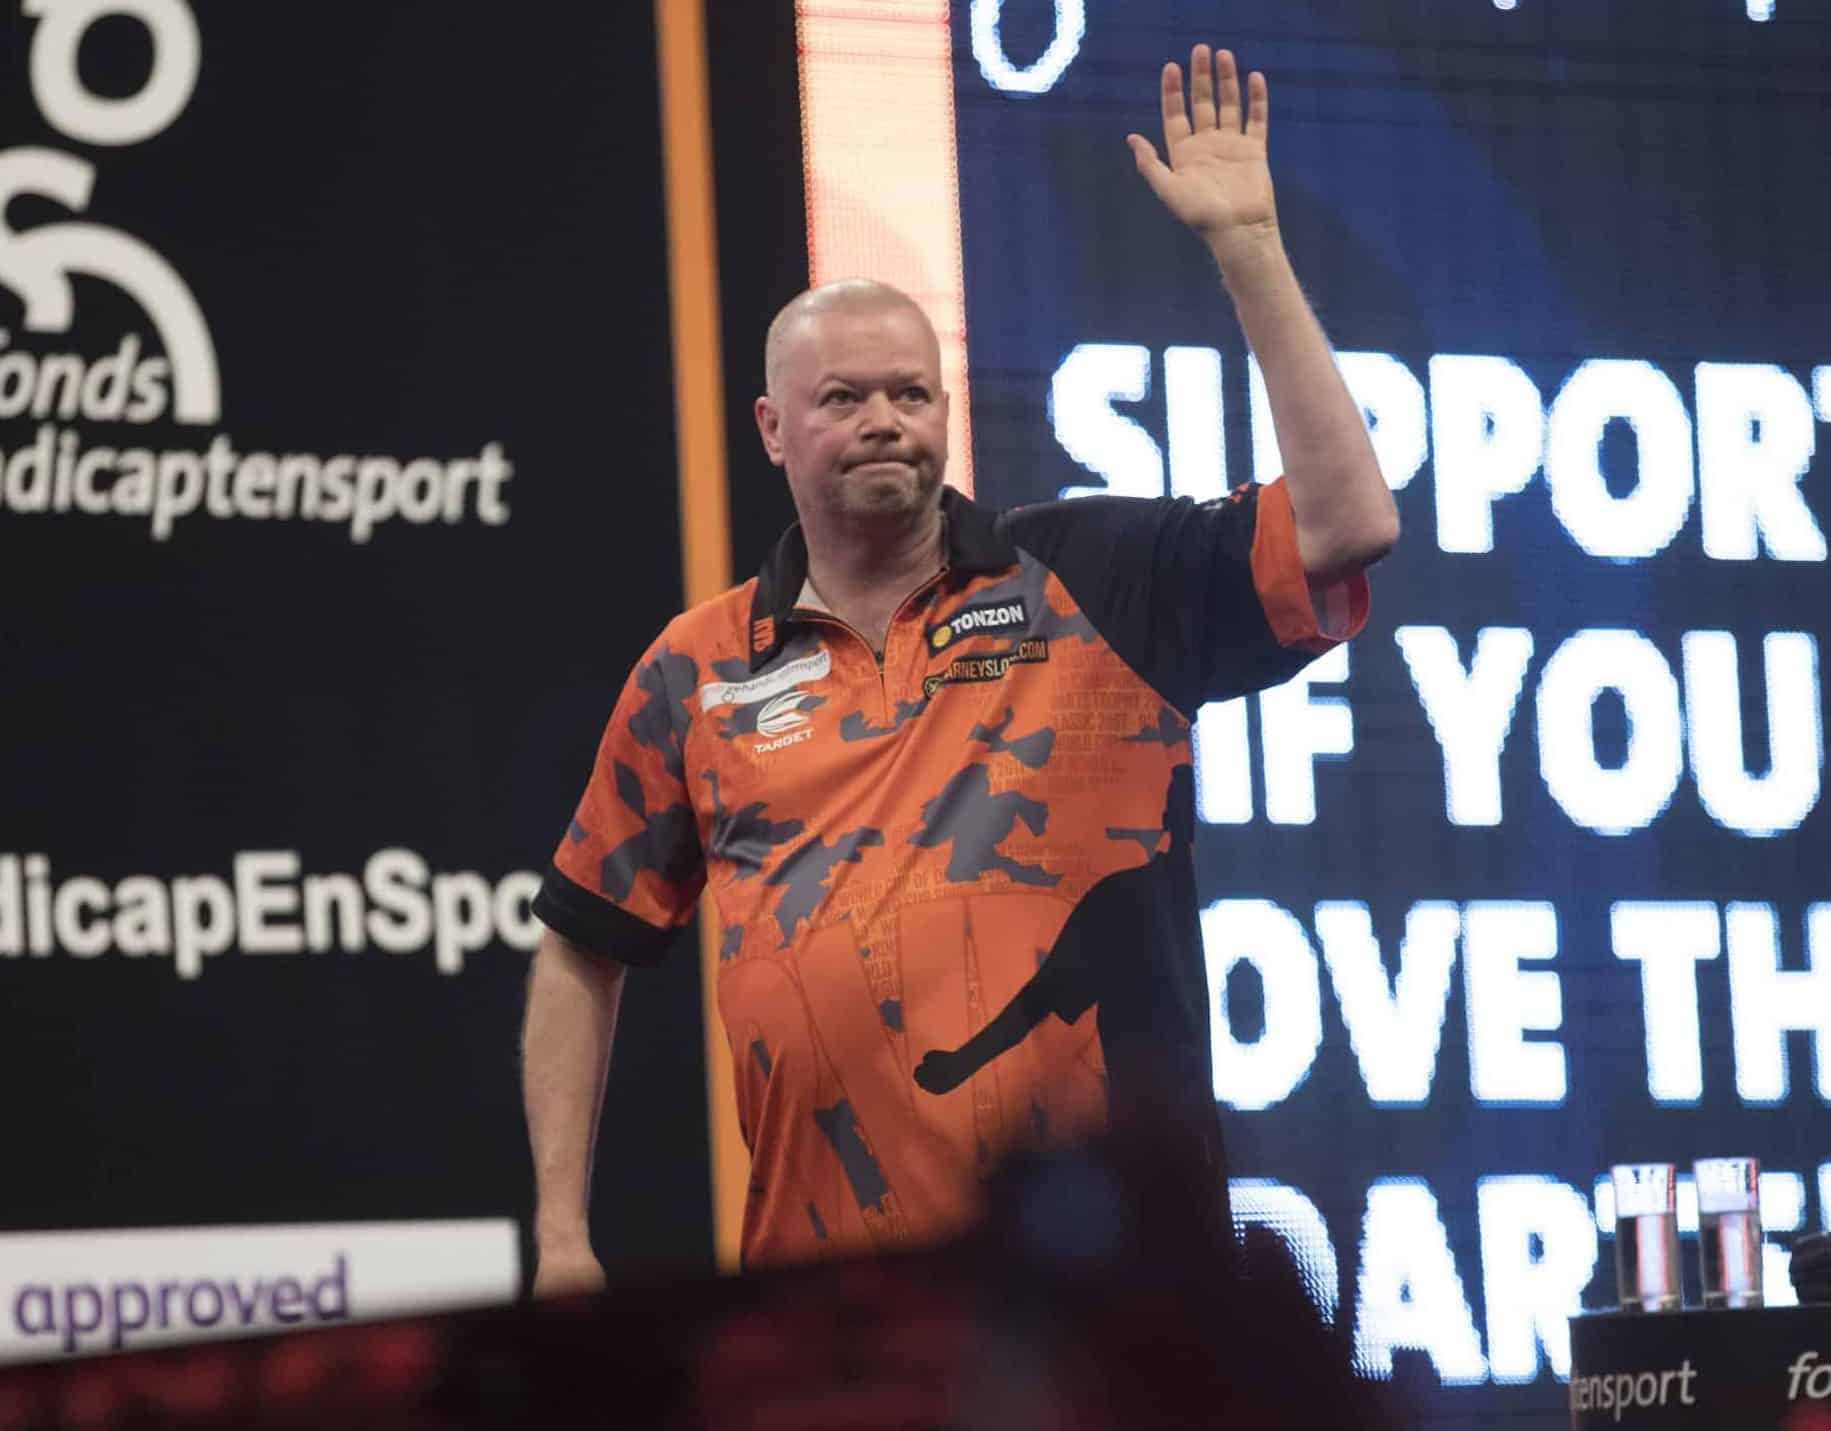 Van Barneveld makes U-turn and reverts decision to retire with immediate effect: 'He will play next Saturday'